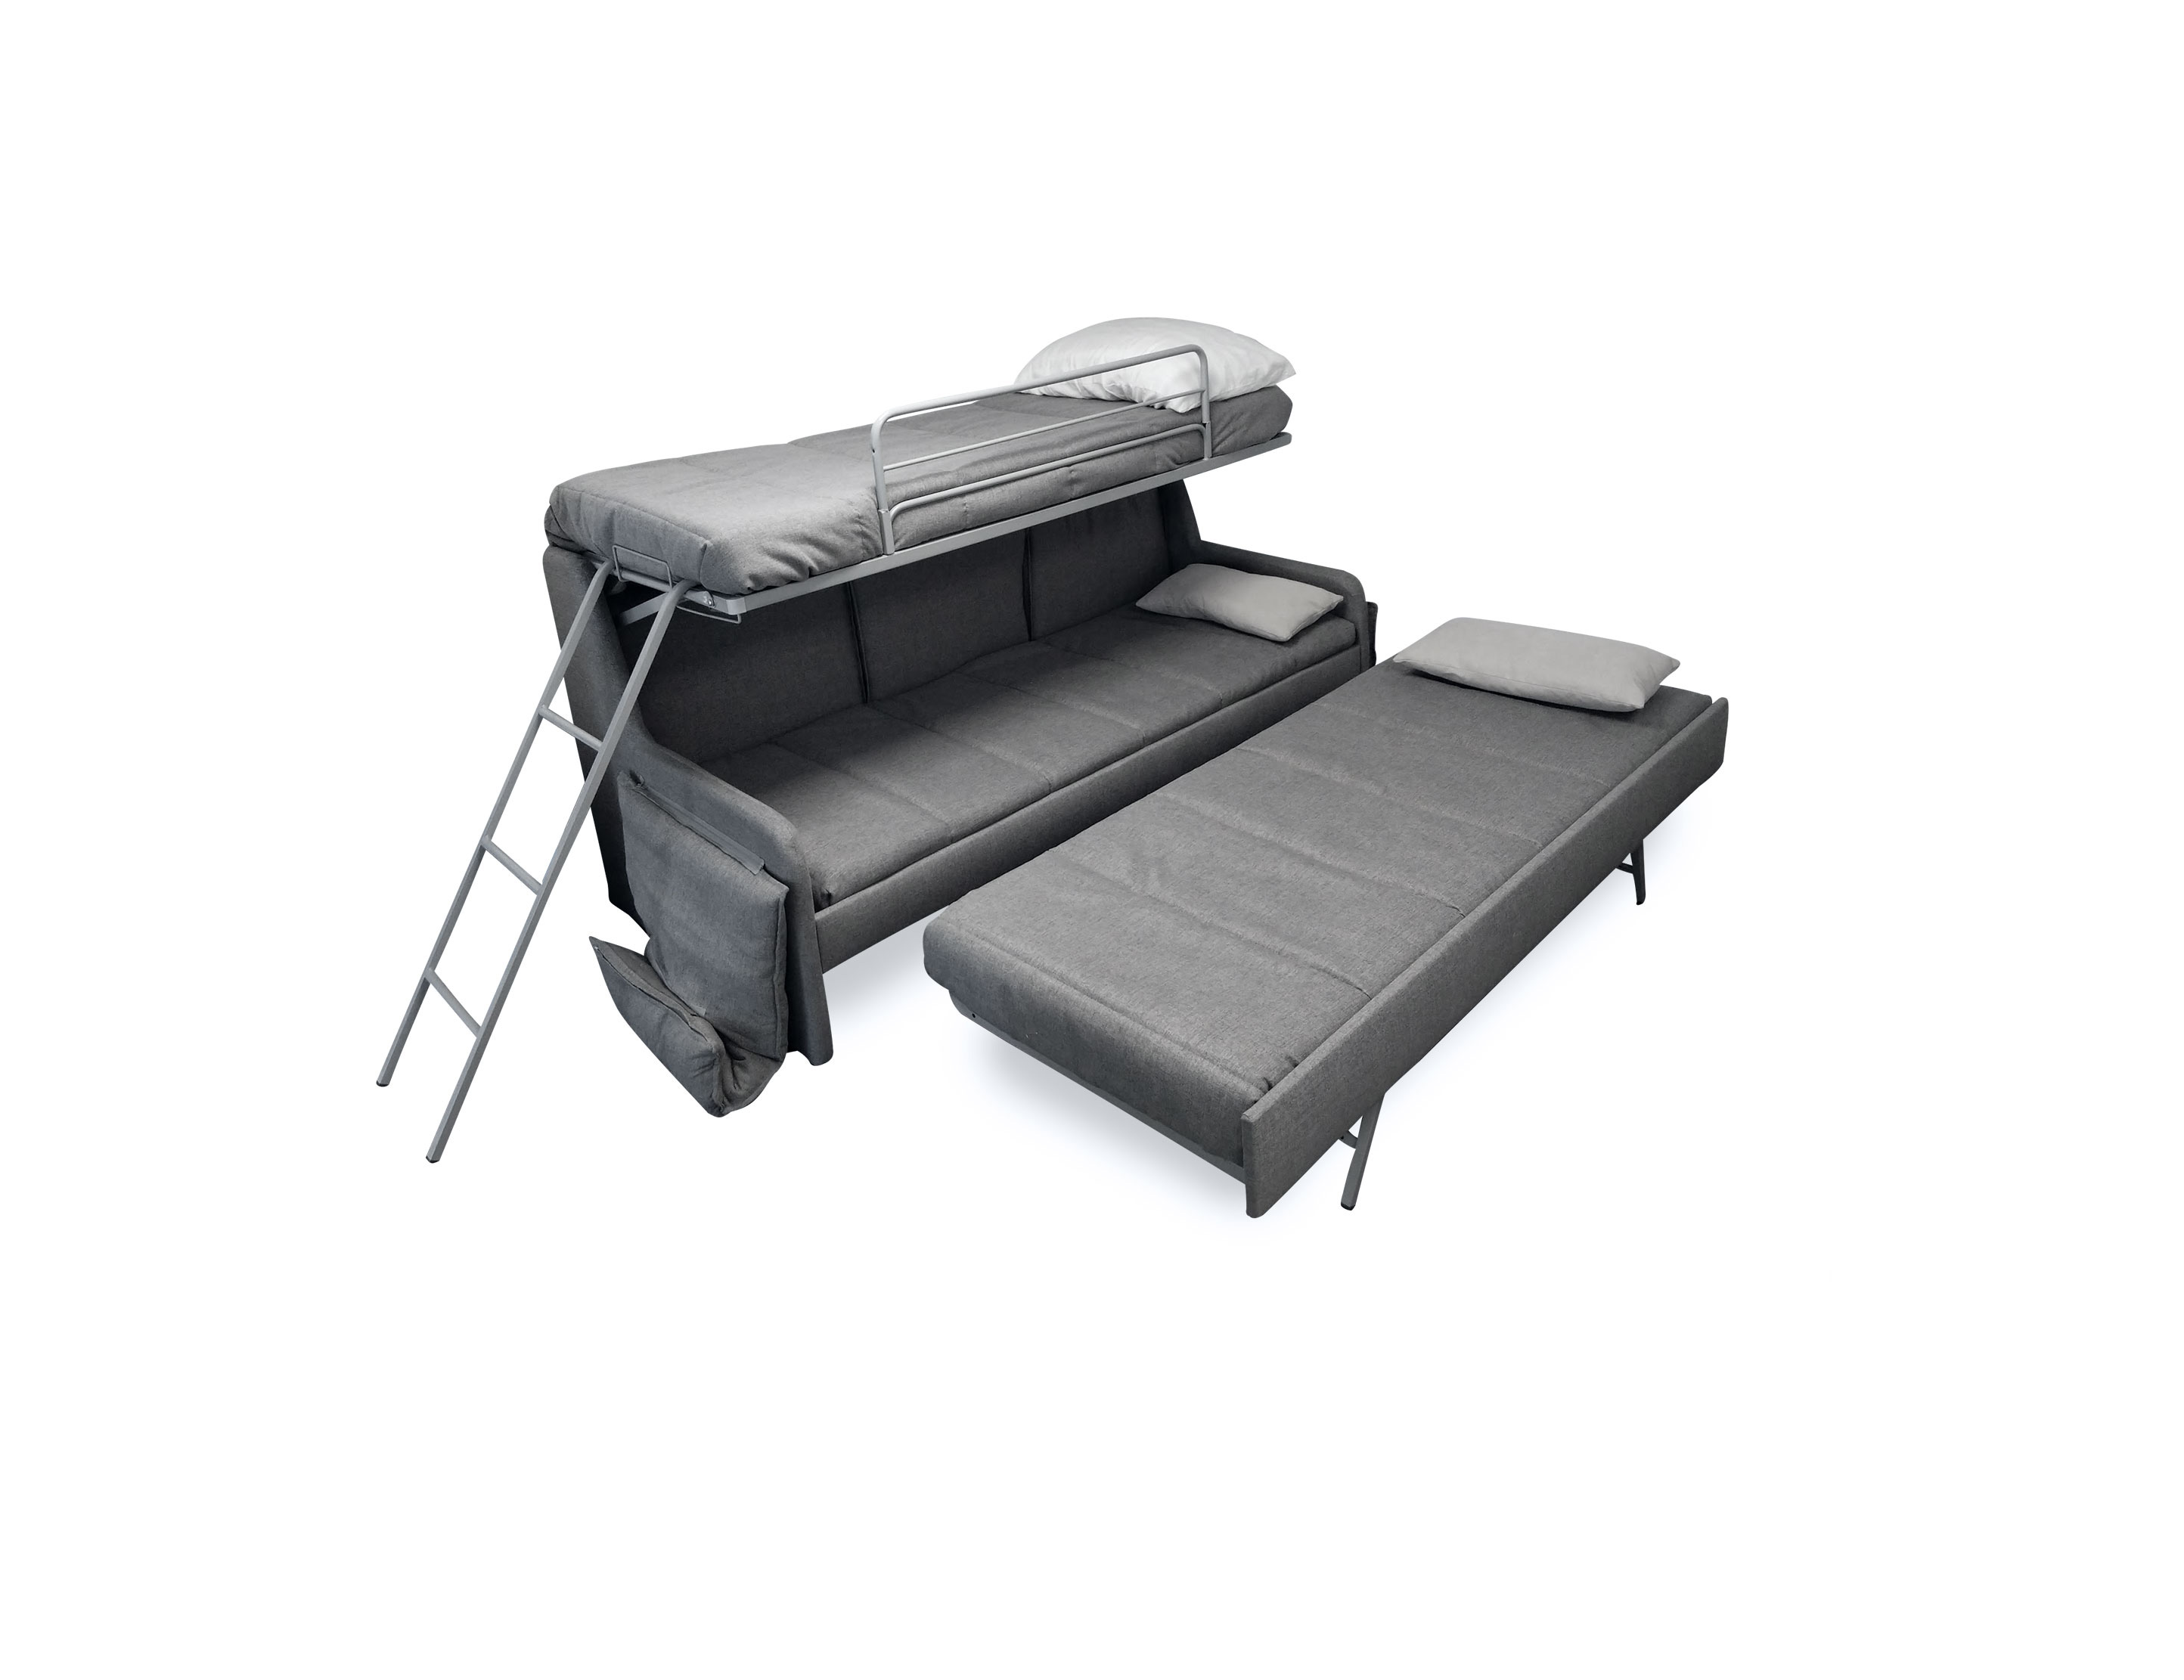 Transforming Sofa Bunk Bed Expand, Twin Beds That Can Convert To Bunk Beds